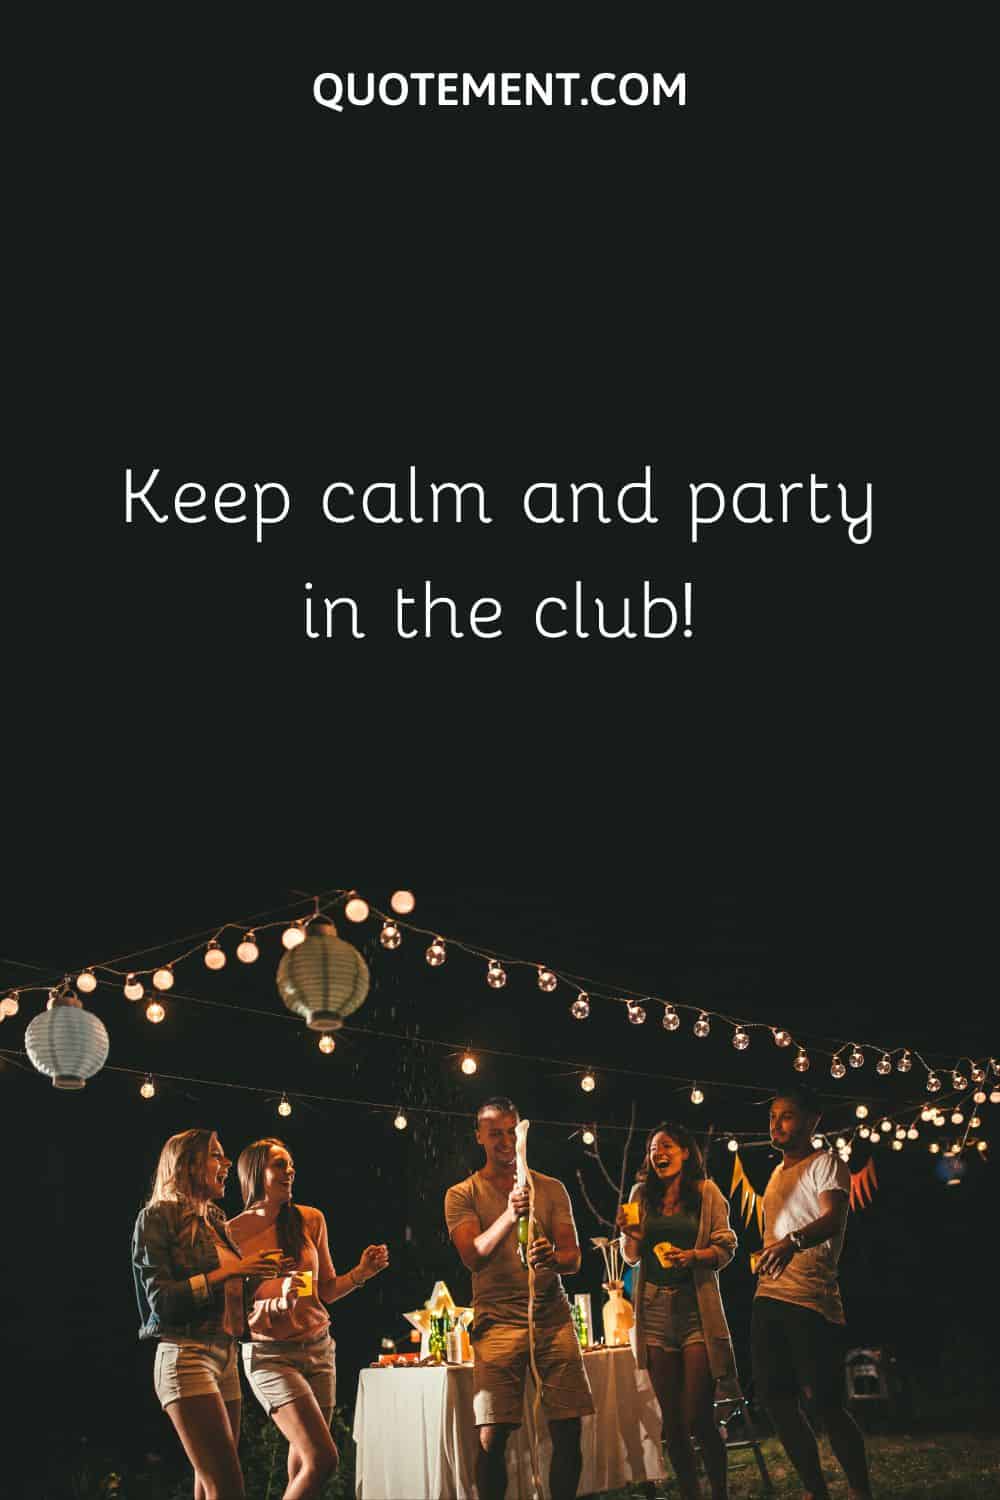 Keep calm and party in the club